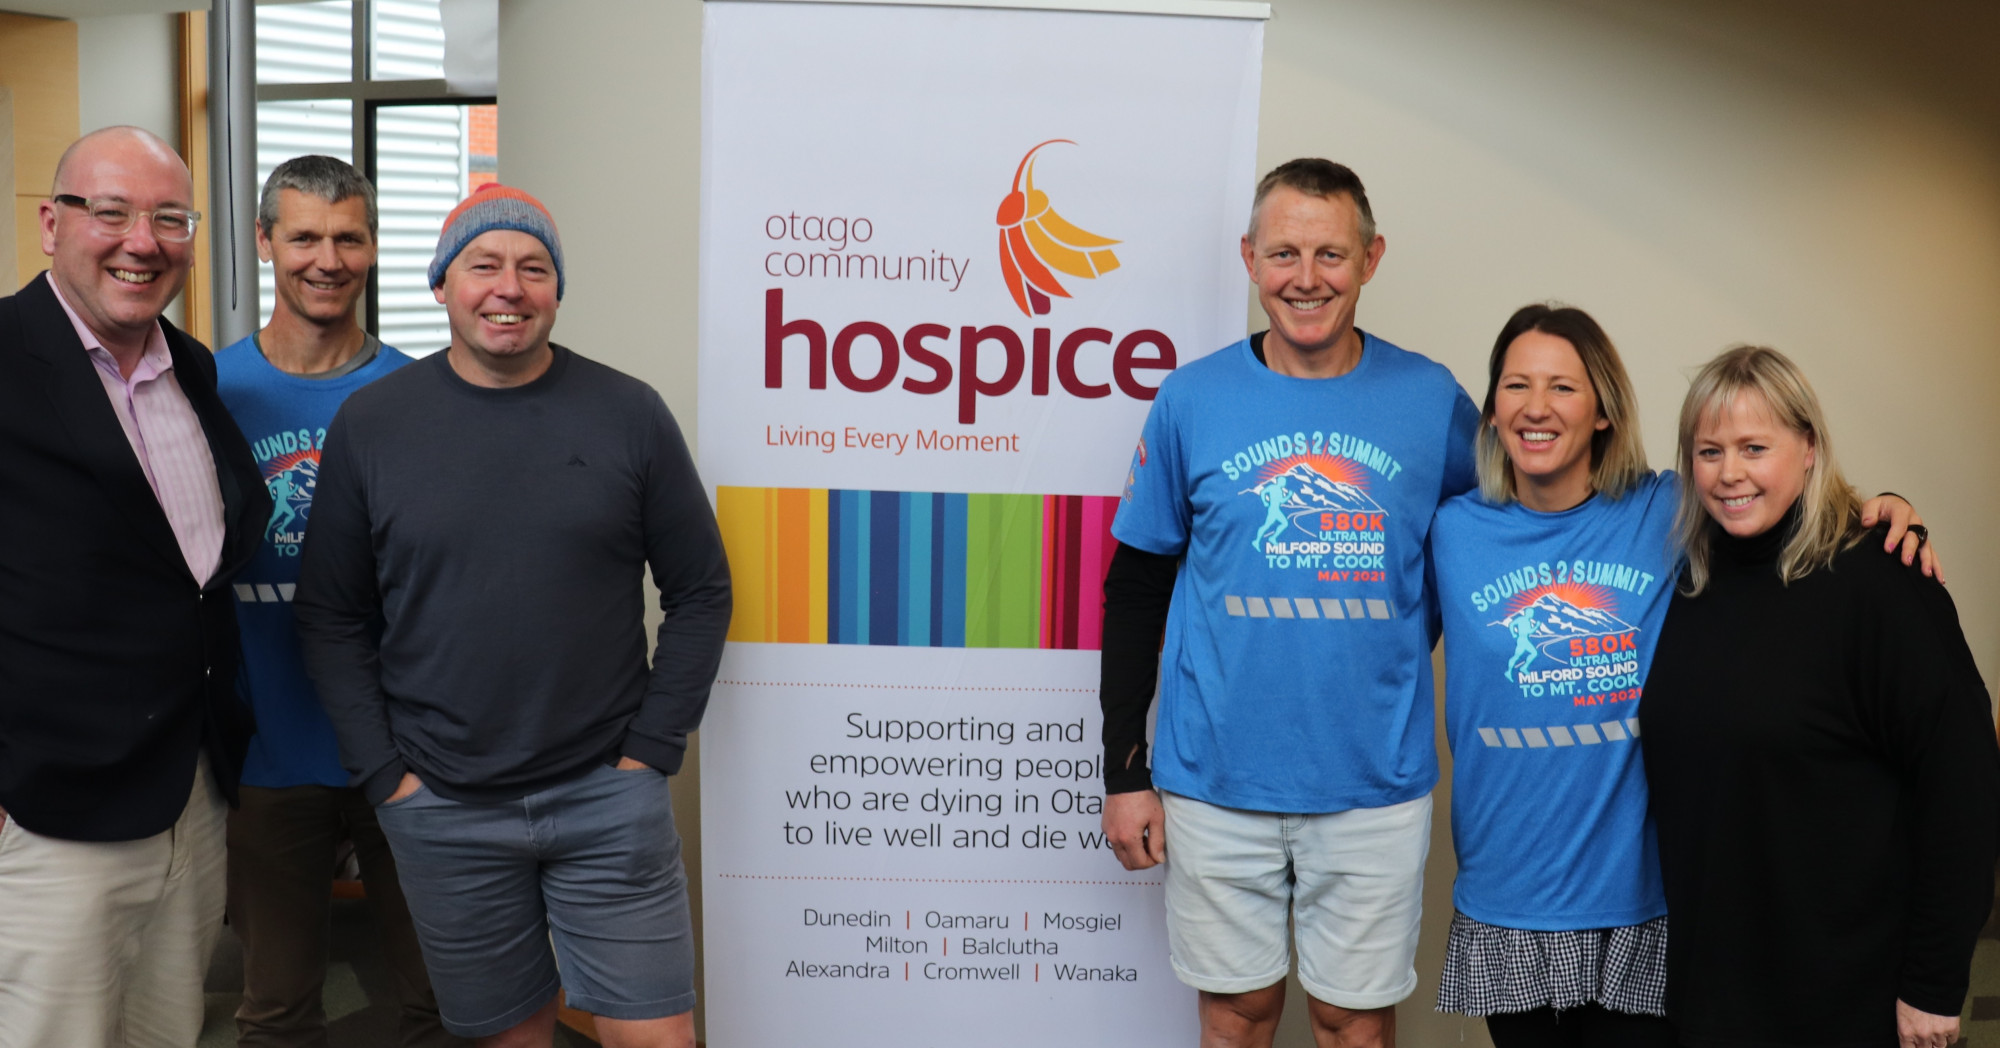 events-fundraisers-otago-community-hospice